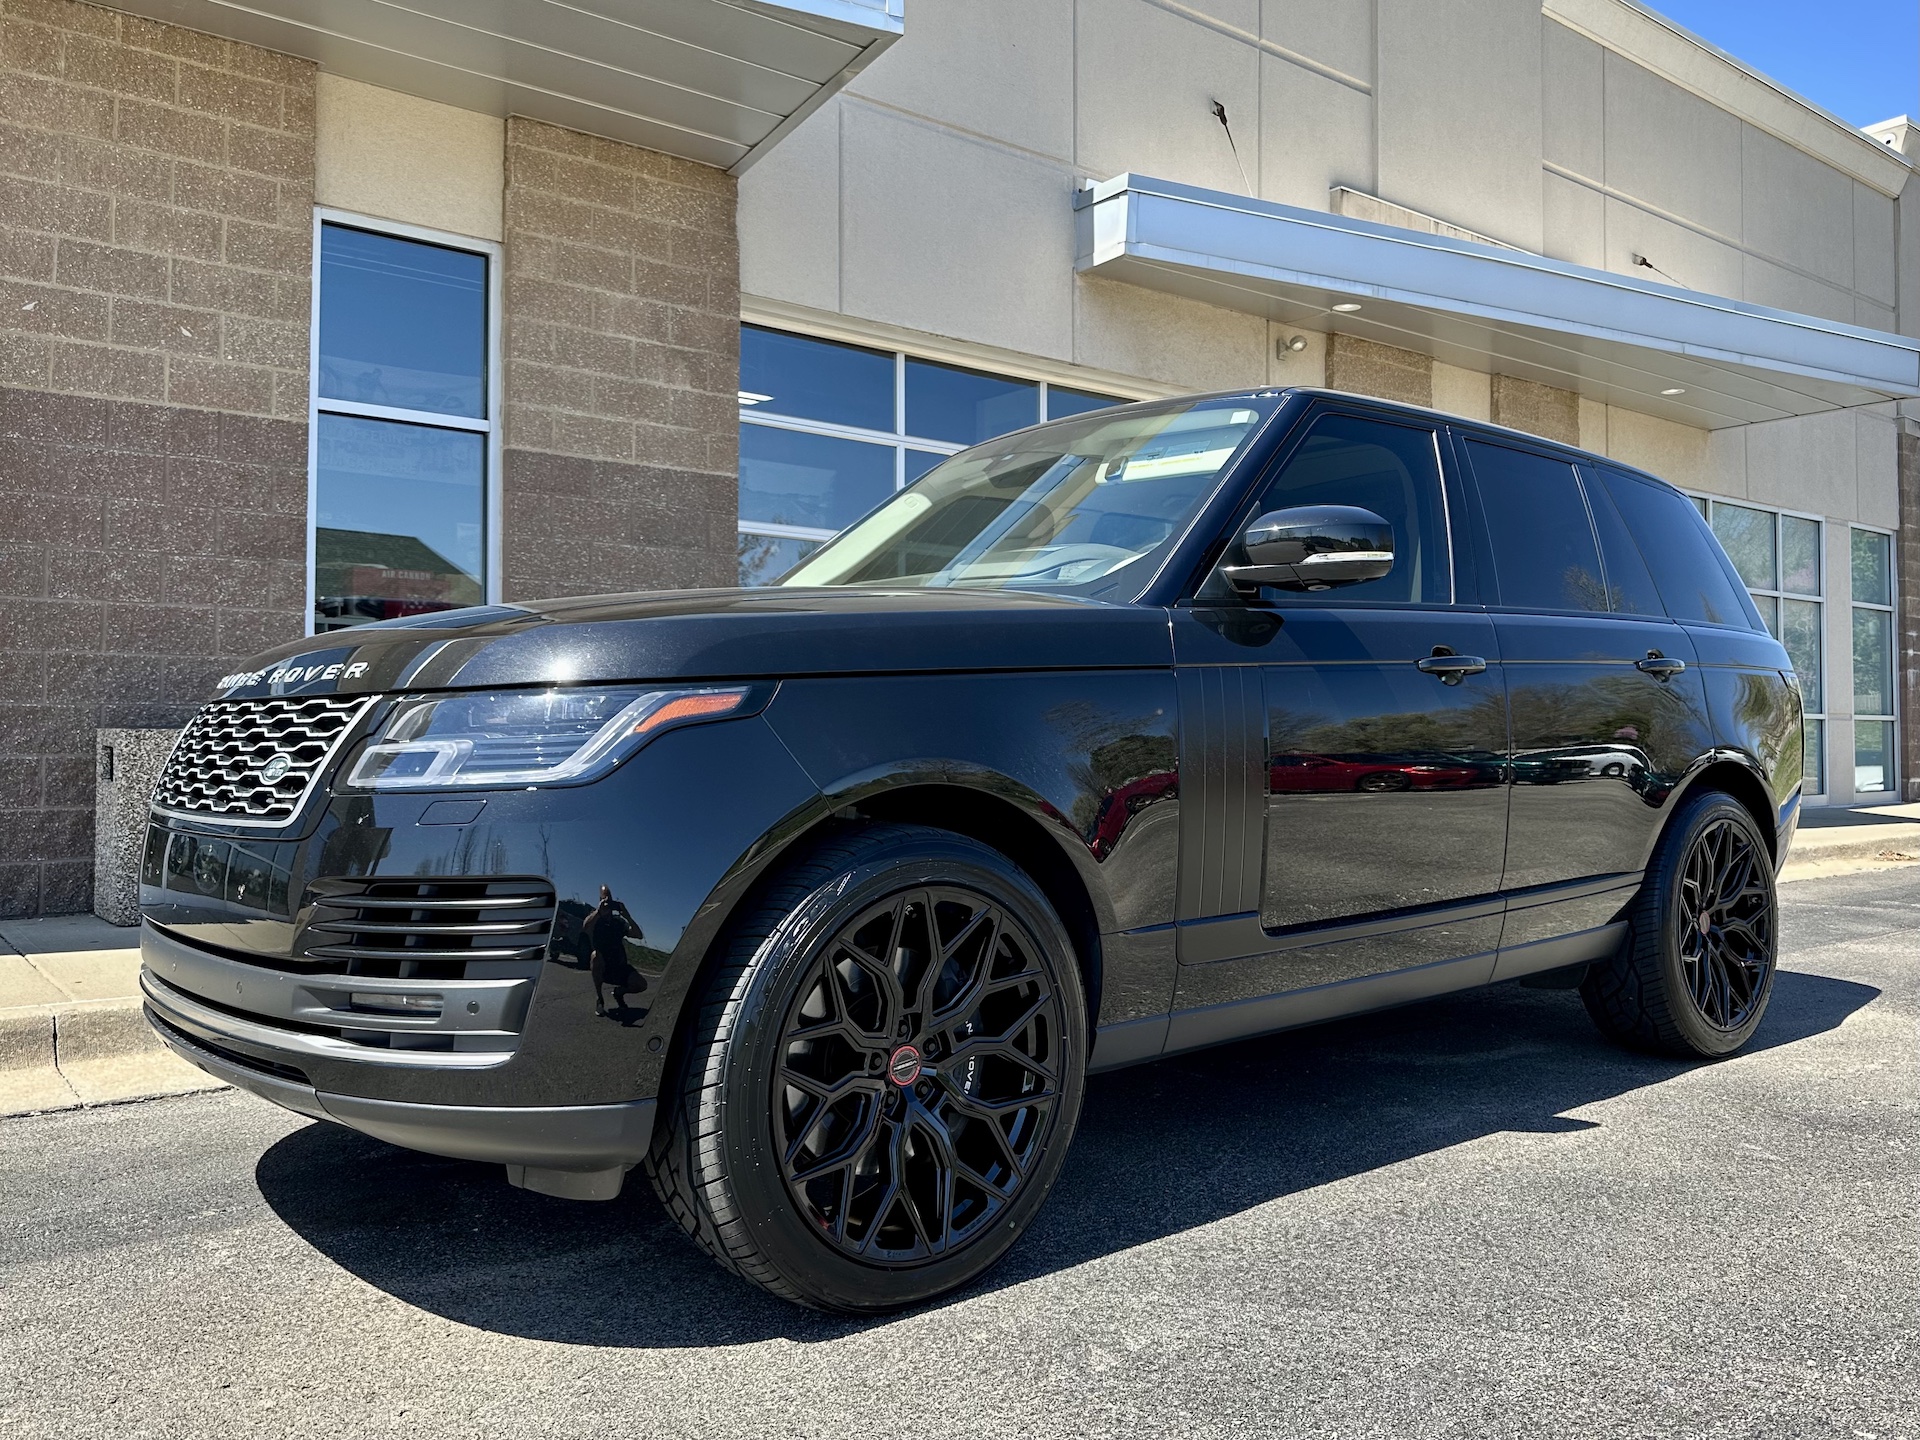  Land Rover Range Rover with Vossen Hybrid Forged HF-2